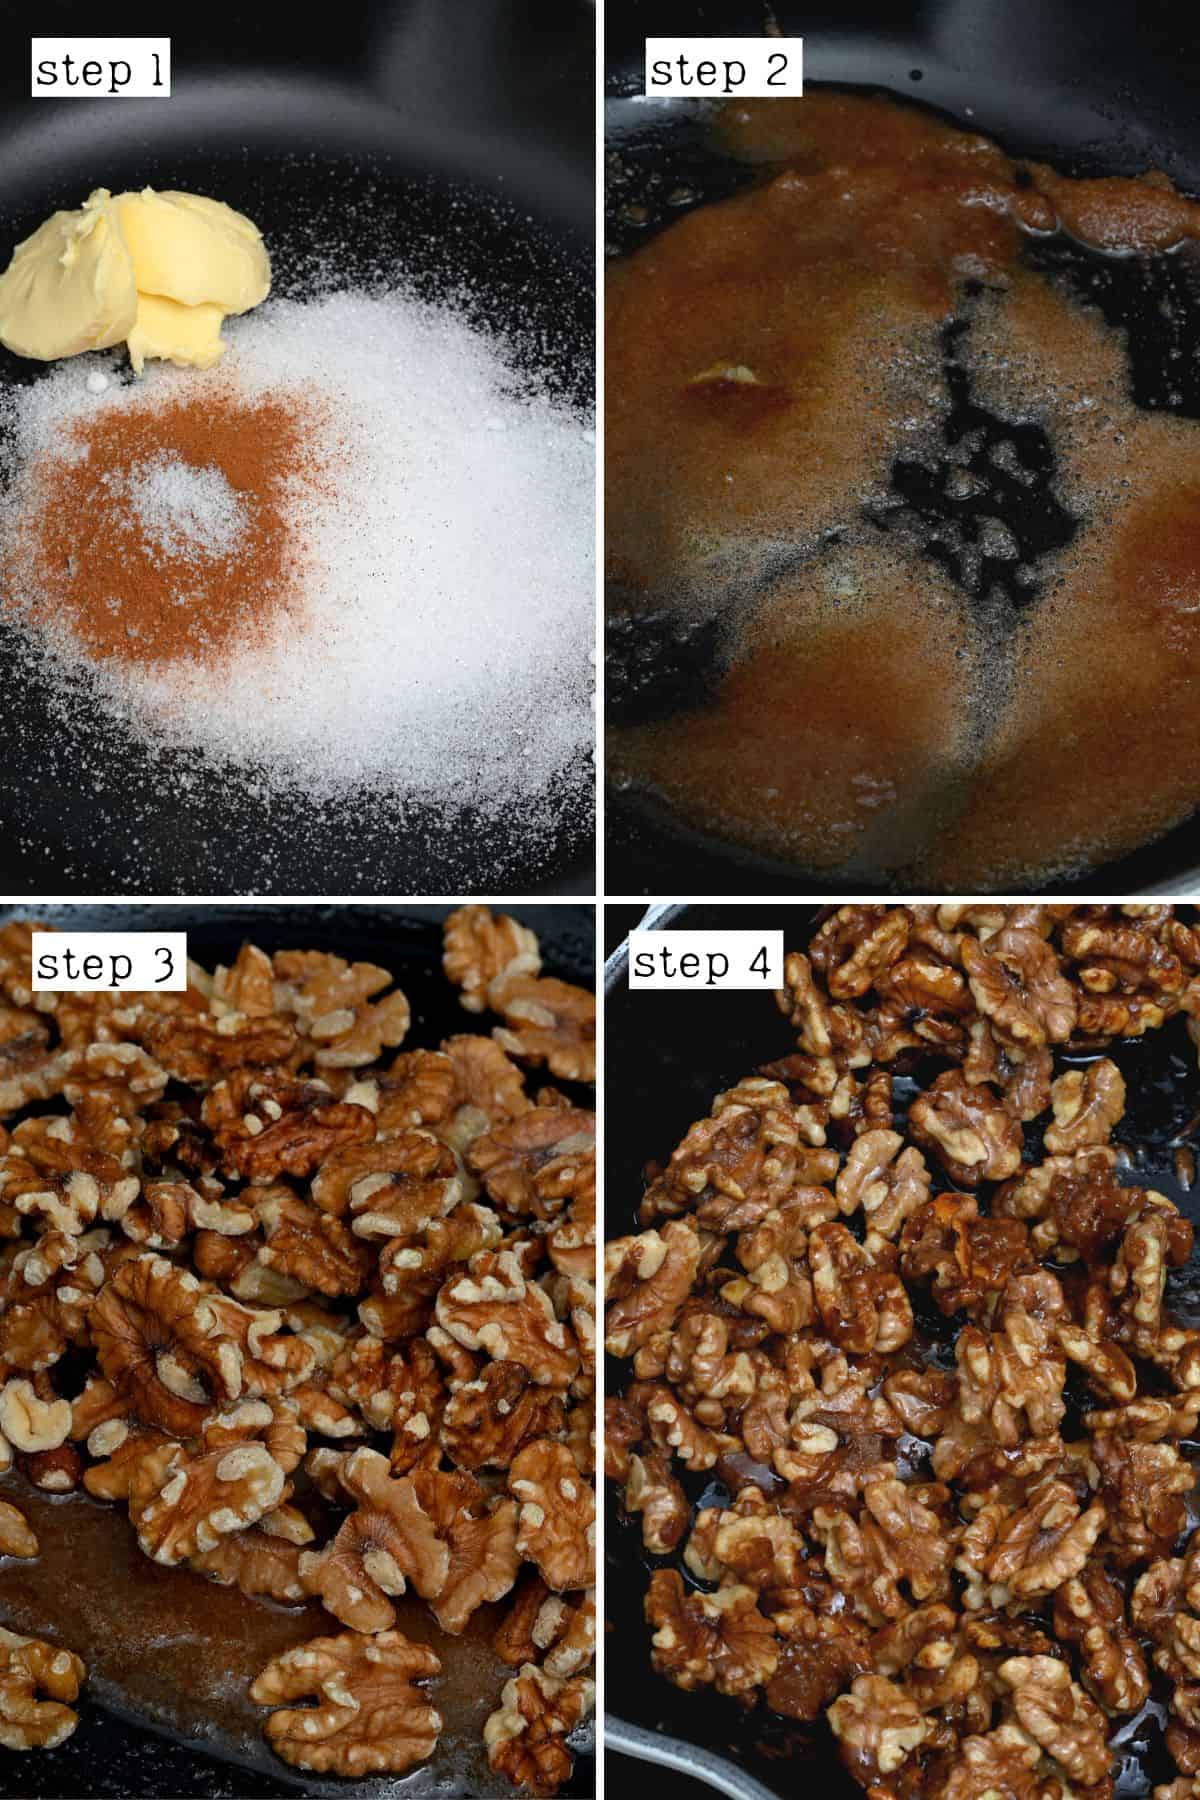 Steps for making candied walnuts